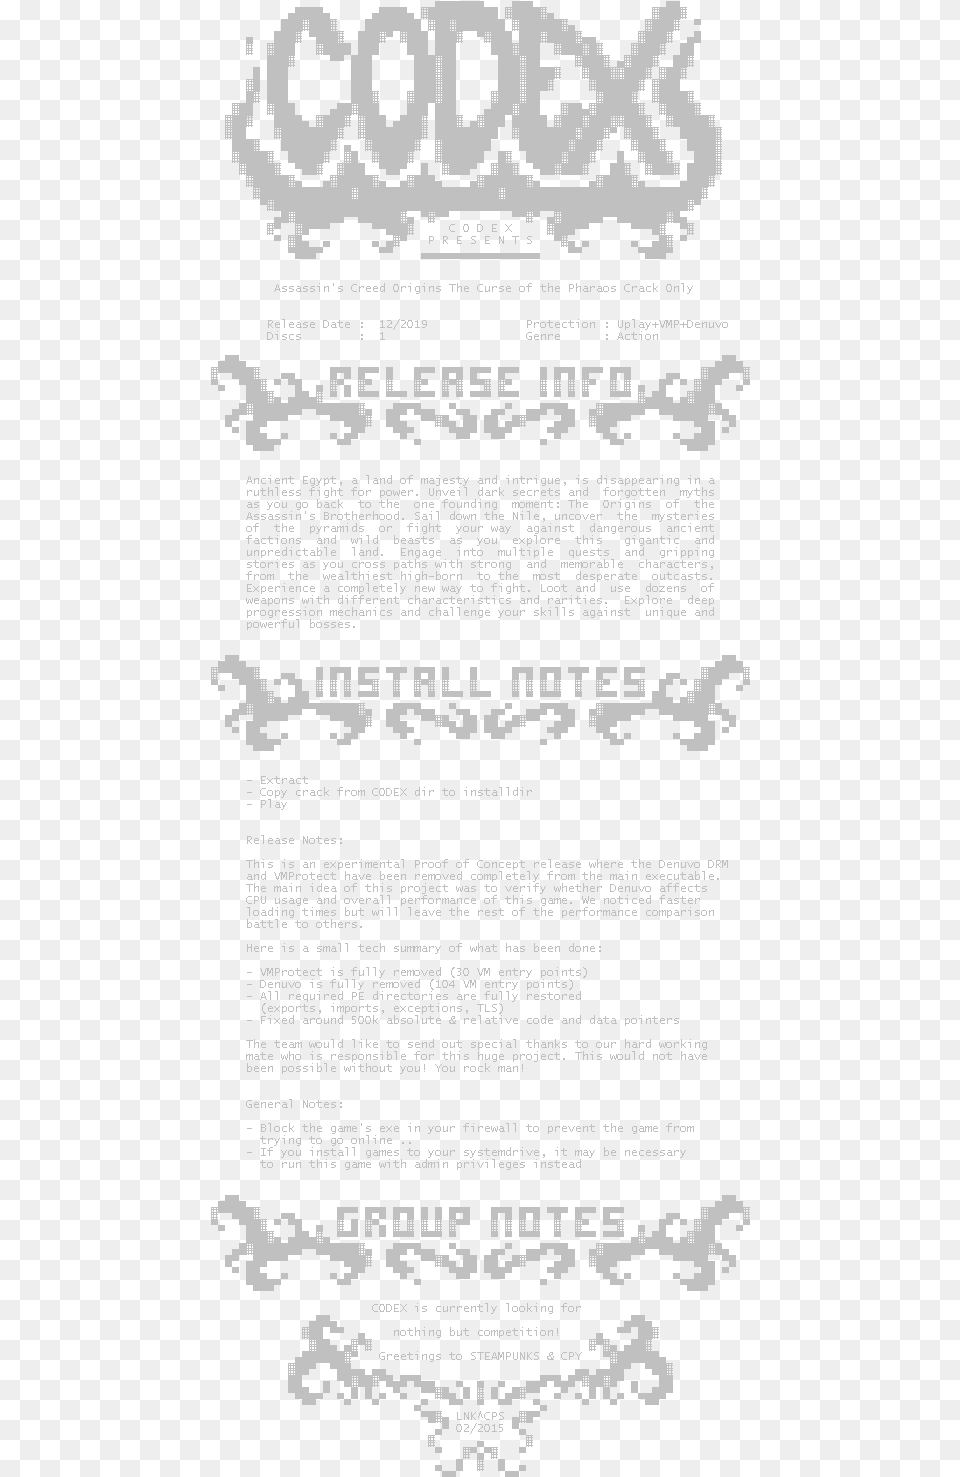 Gears Of War 5 Crack Codex, Advertisement, Poster, Text Png Image